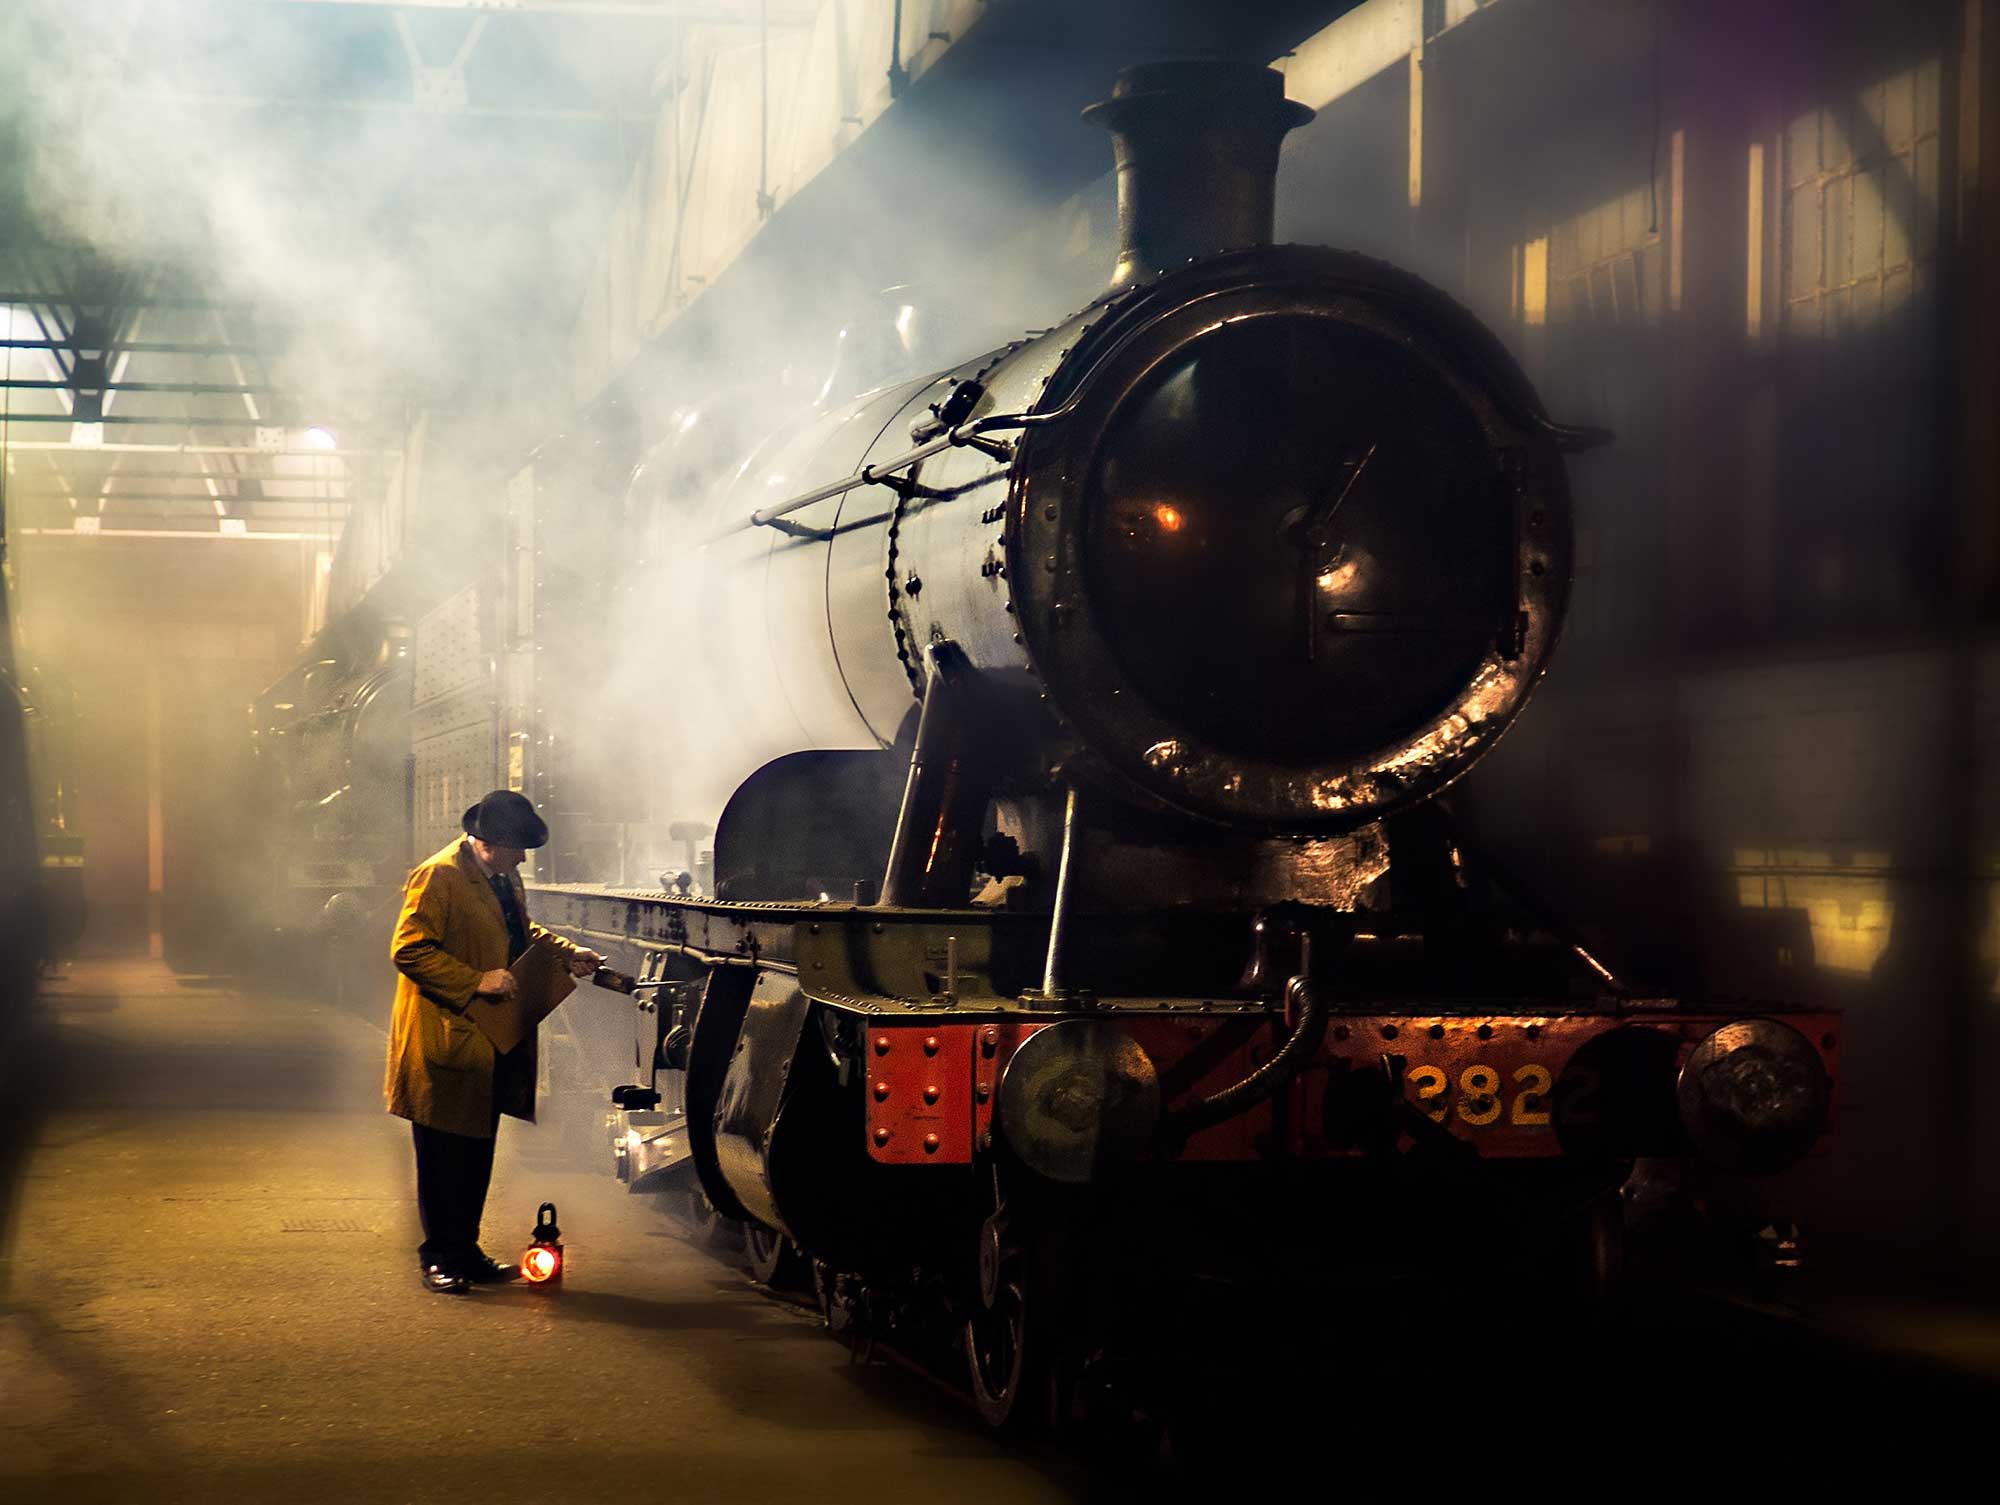 A photograph of a steam engine in a railway station, with a person conducting mechanical inspections of the engine.